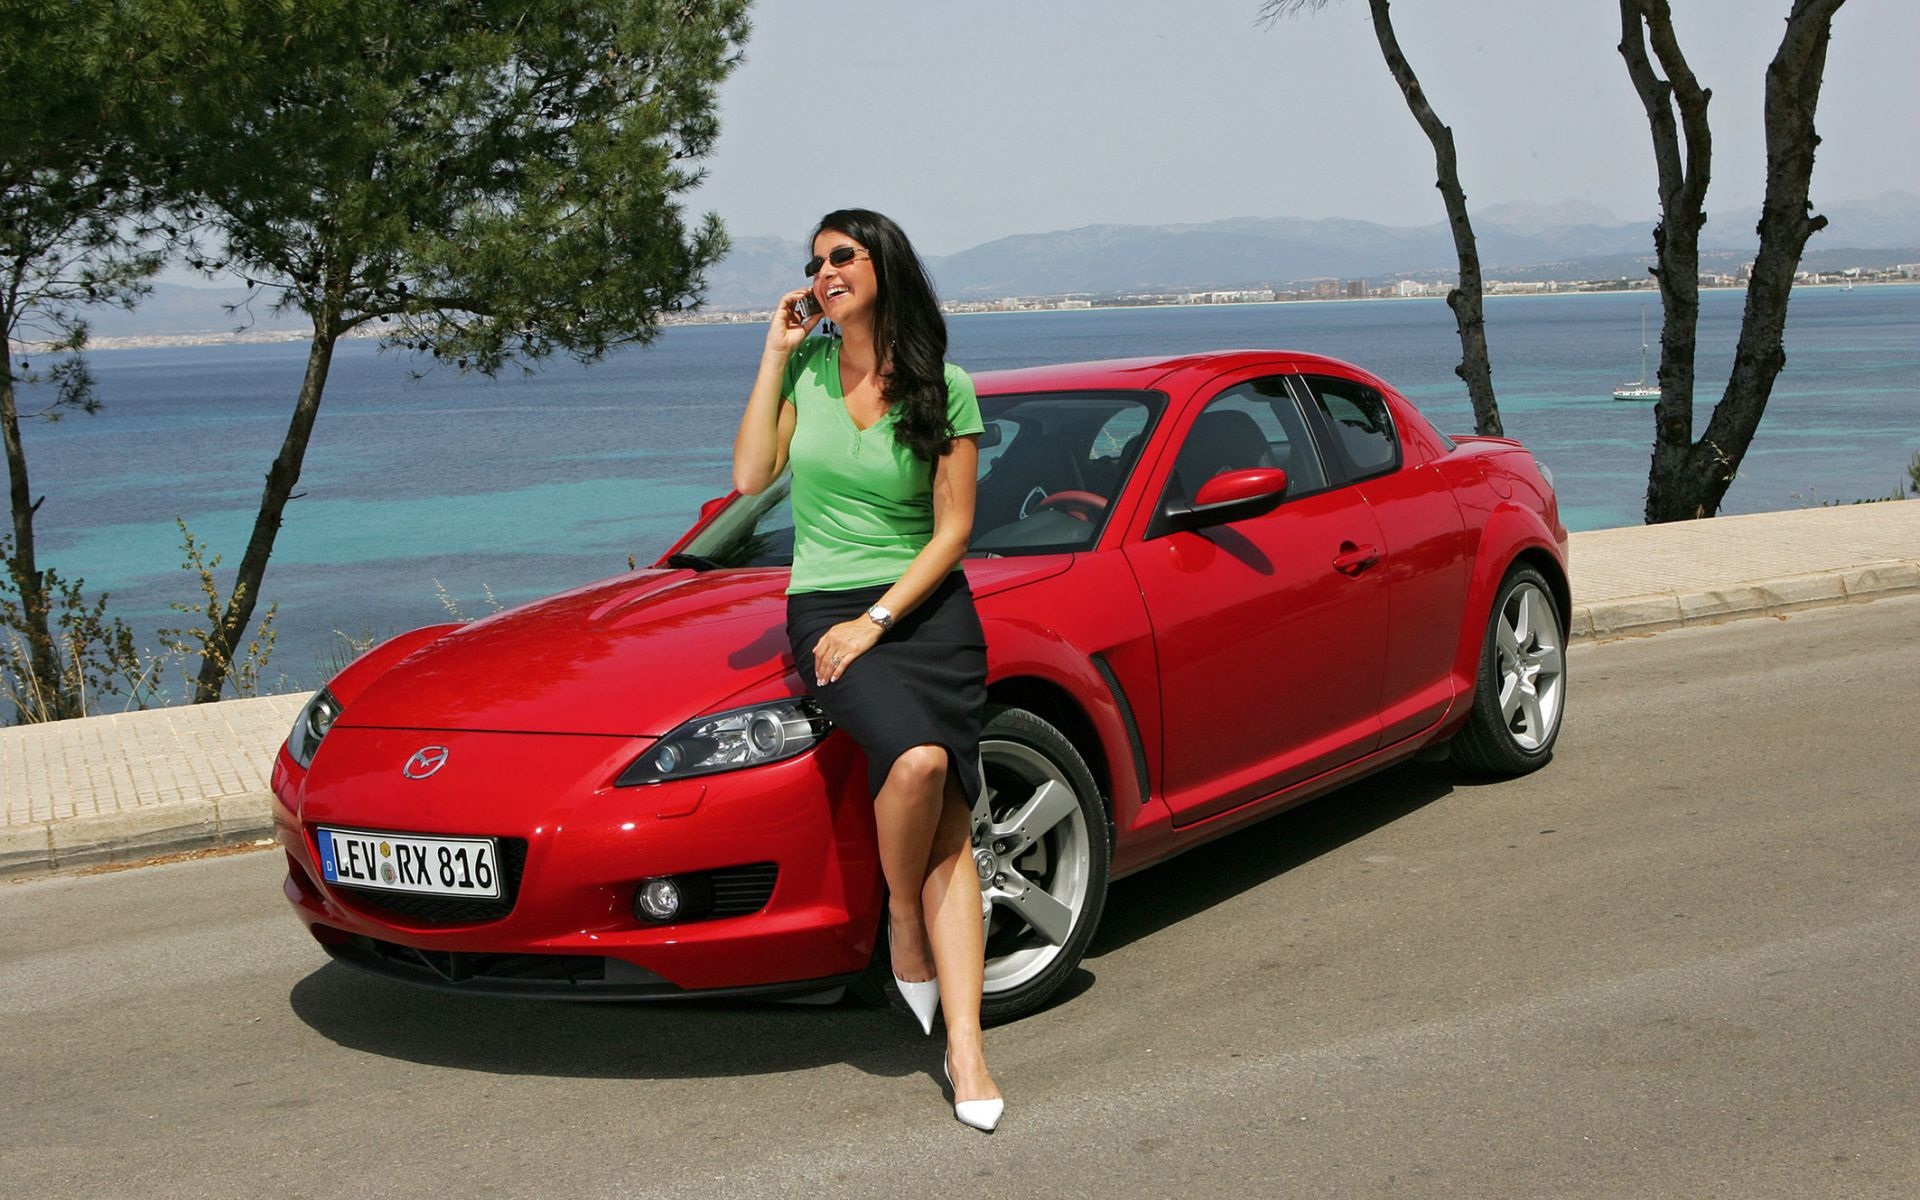 Red Mazda RX8 with girl HD Wallpaper 2013 - 9to5 Car Wallpapers